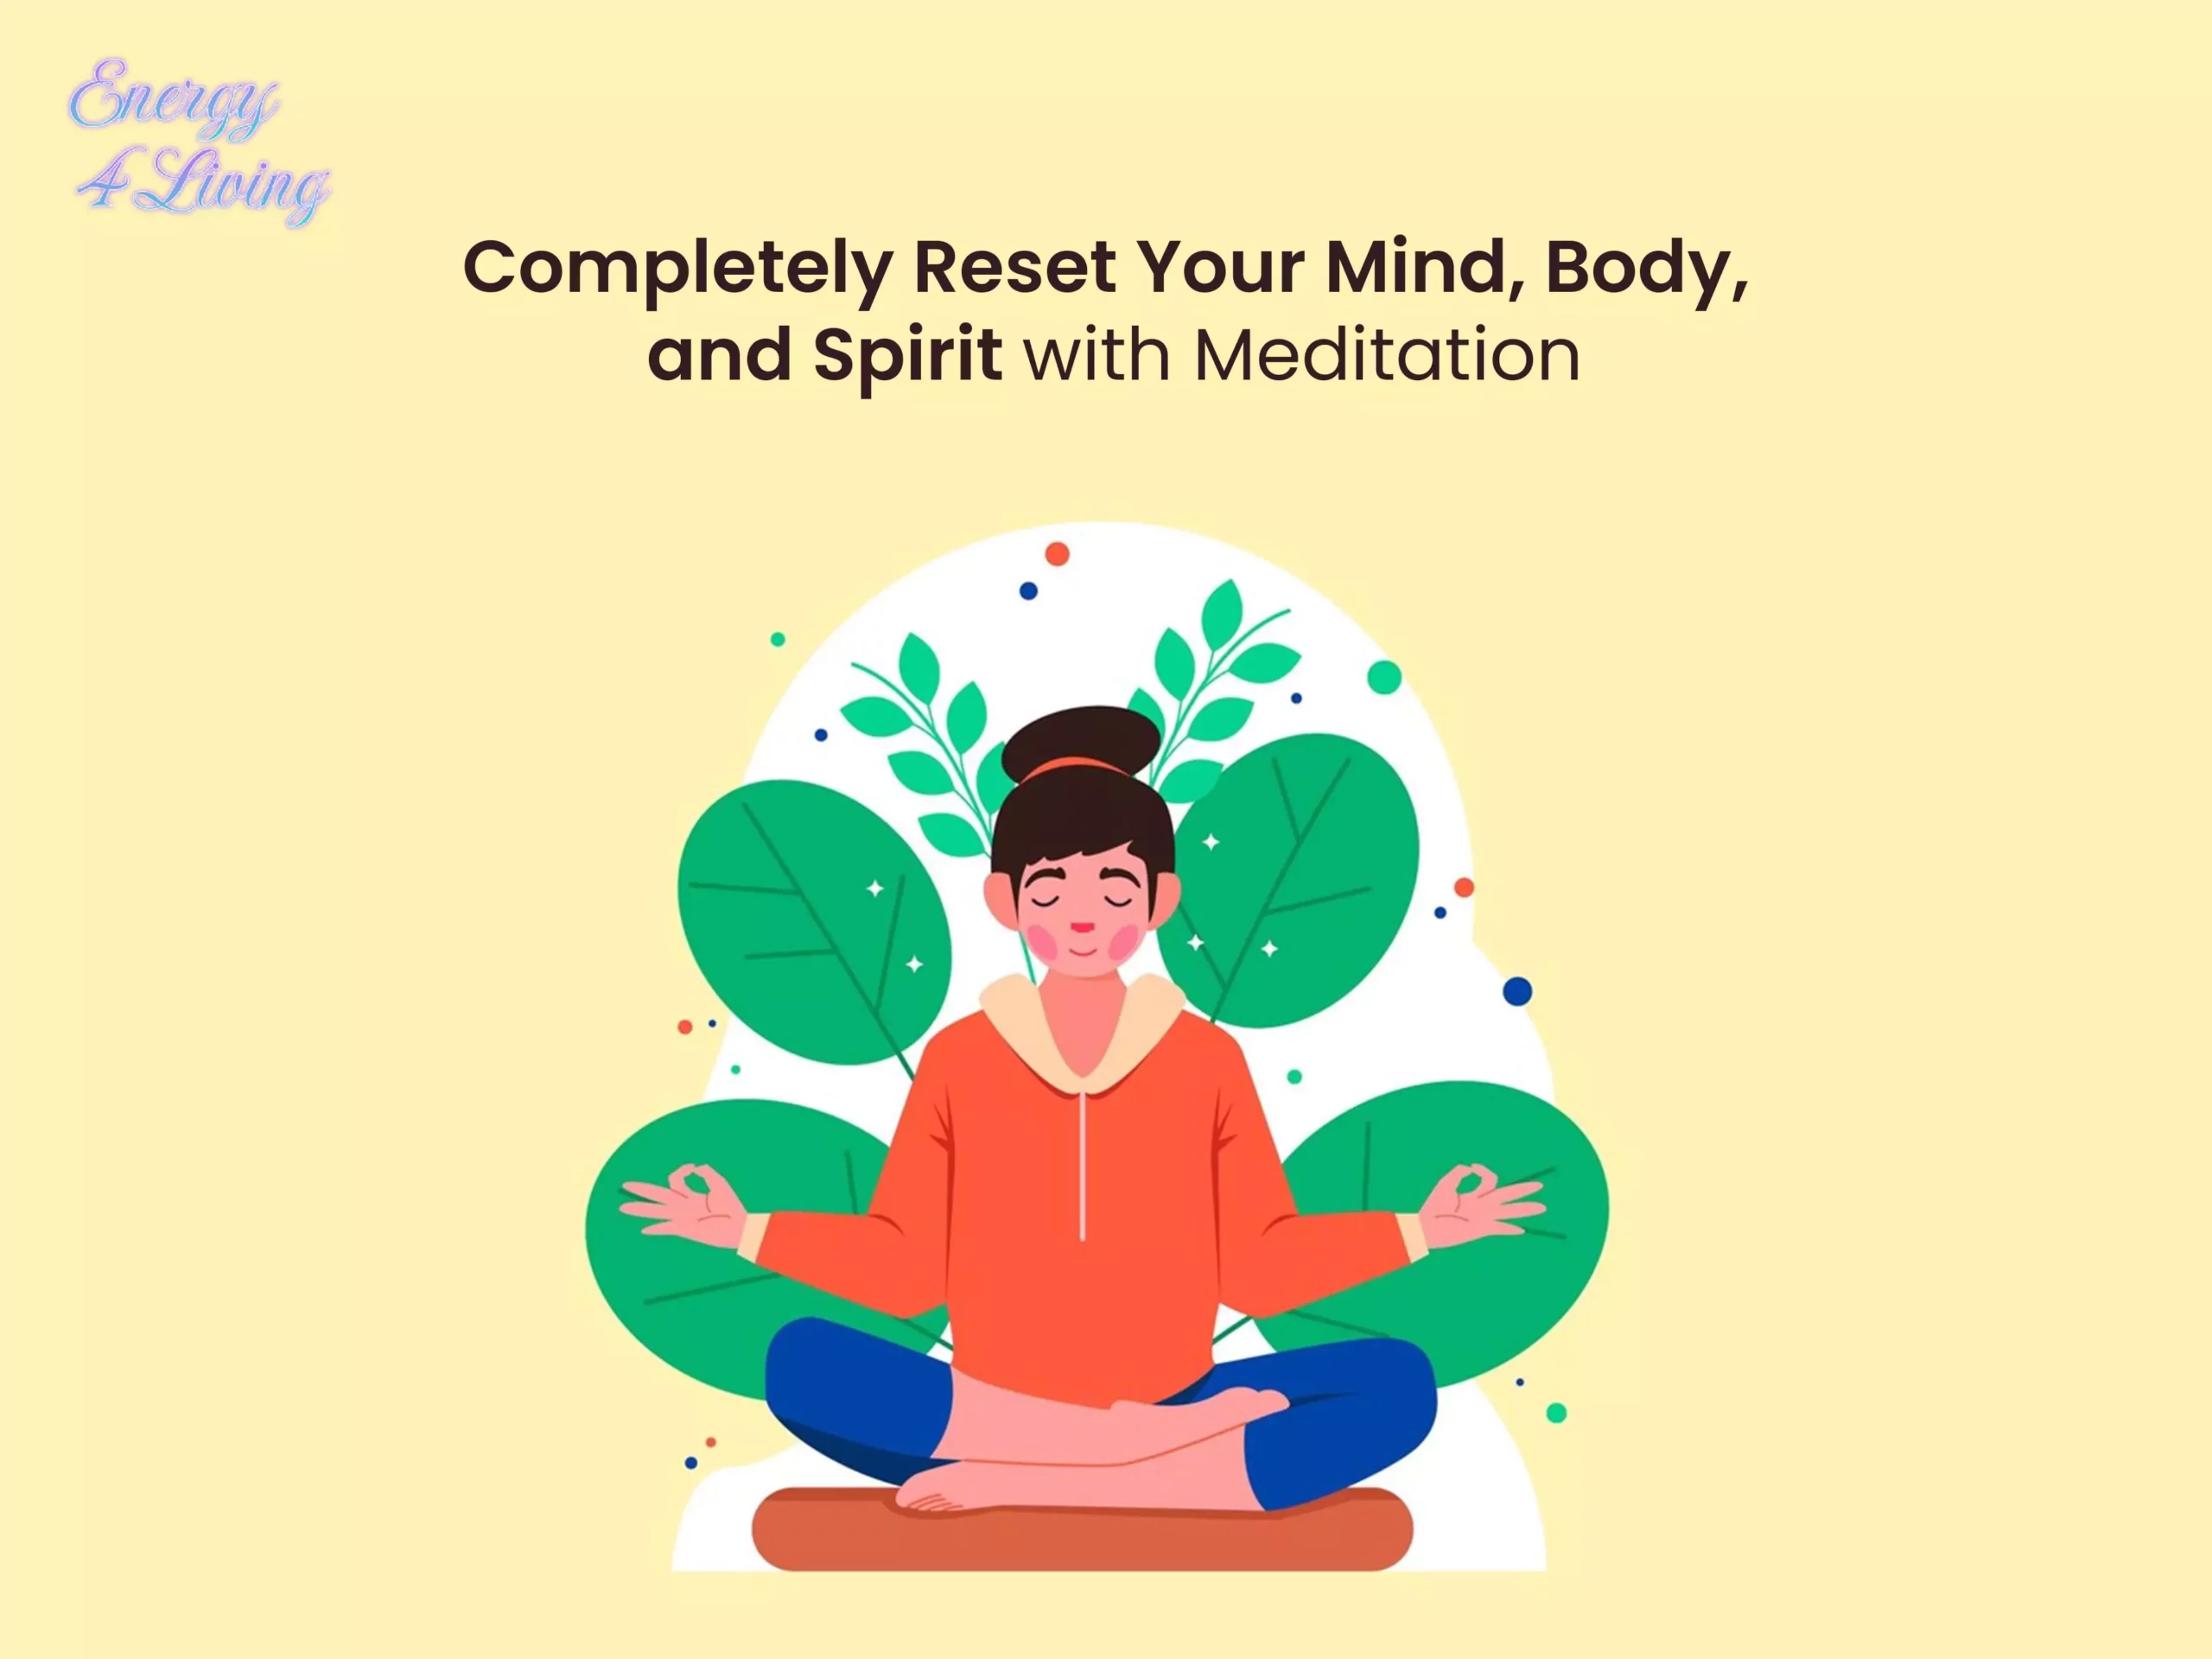 Completely Reset Your Mind, Body, and Spirit with Meditation